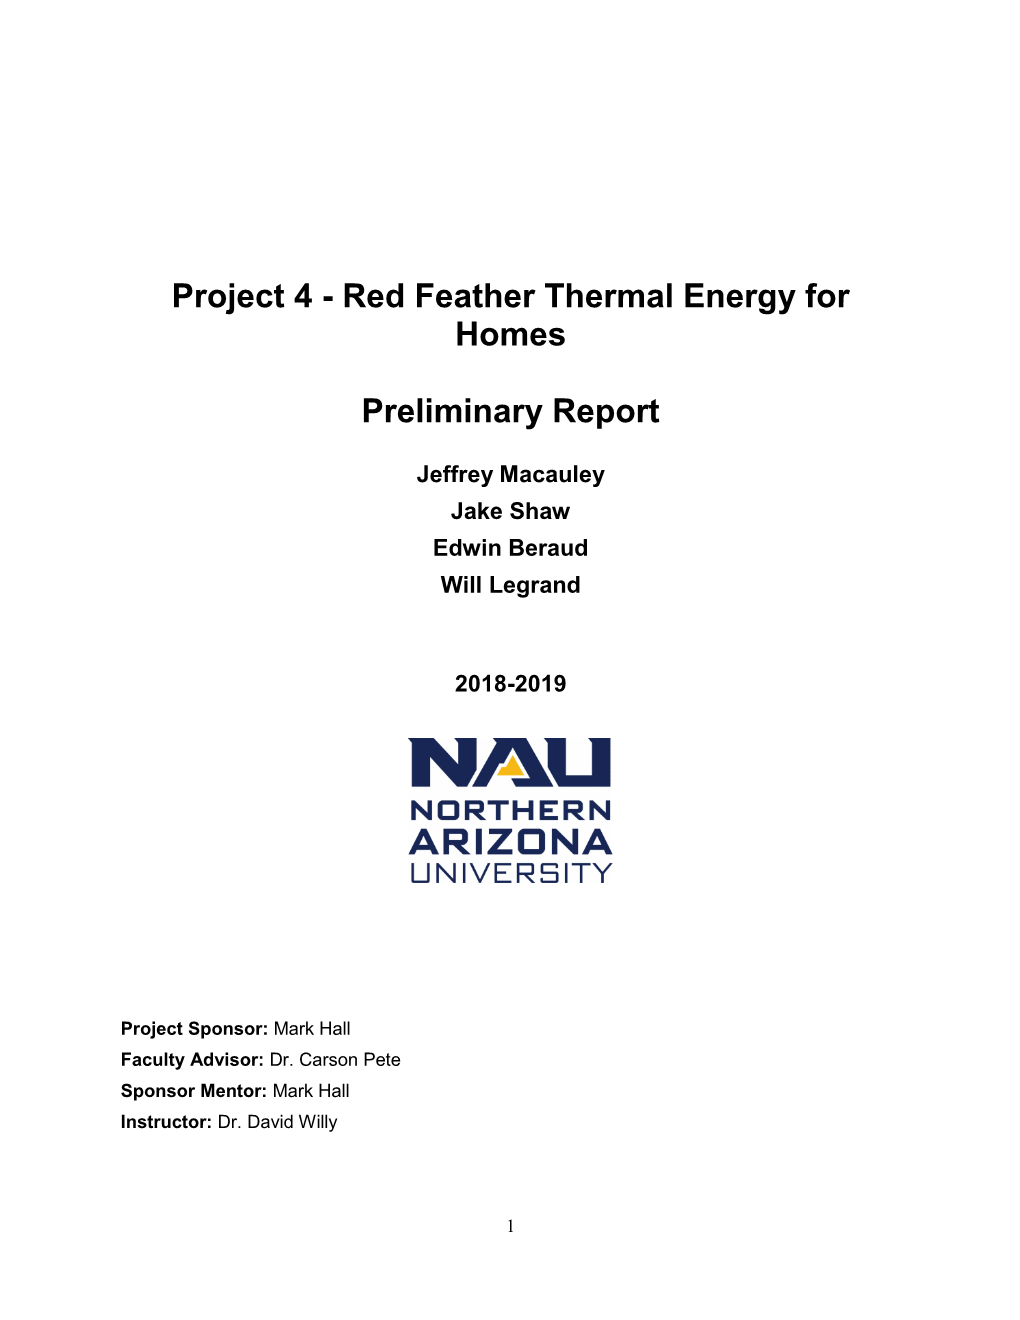 Project 4 - Red Feather Thermal Energy for Homes